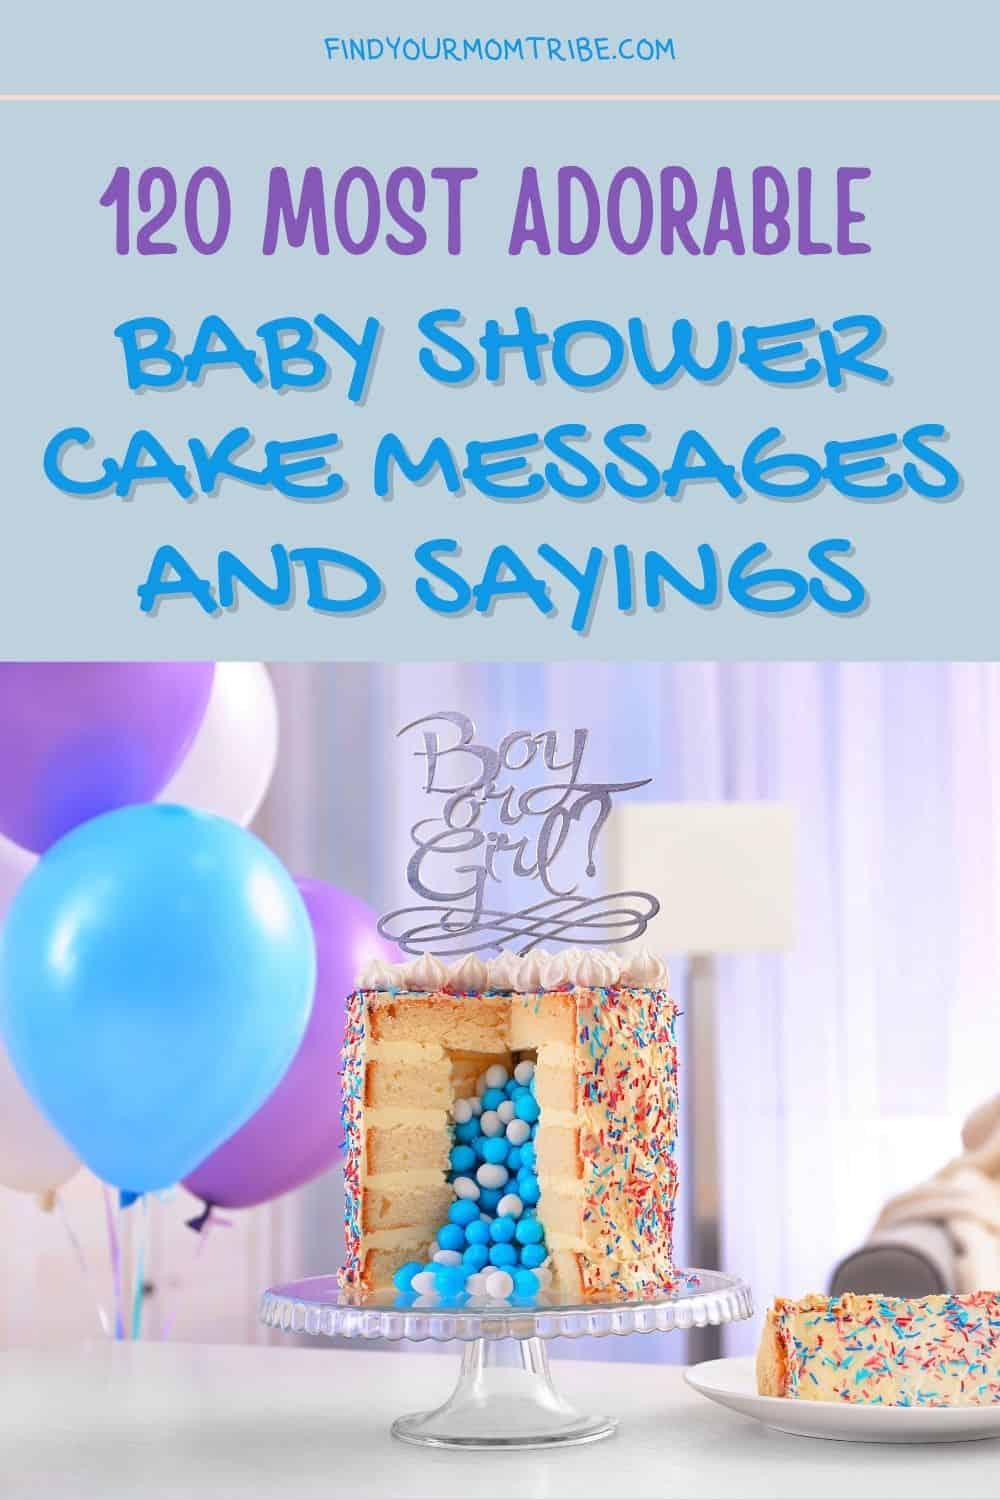 Pinterest baby shower cake messages 